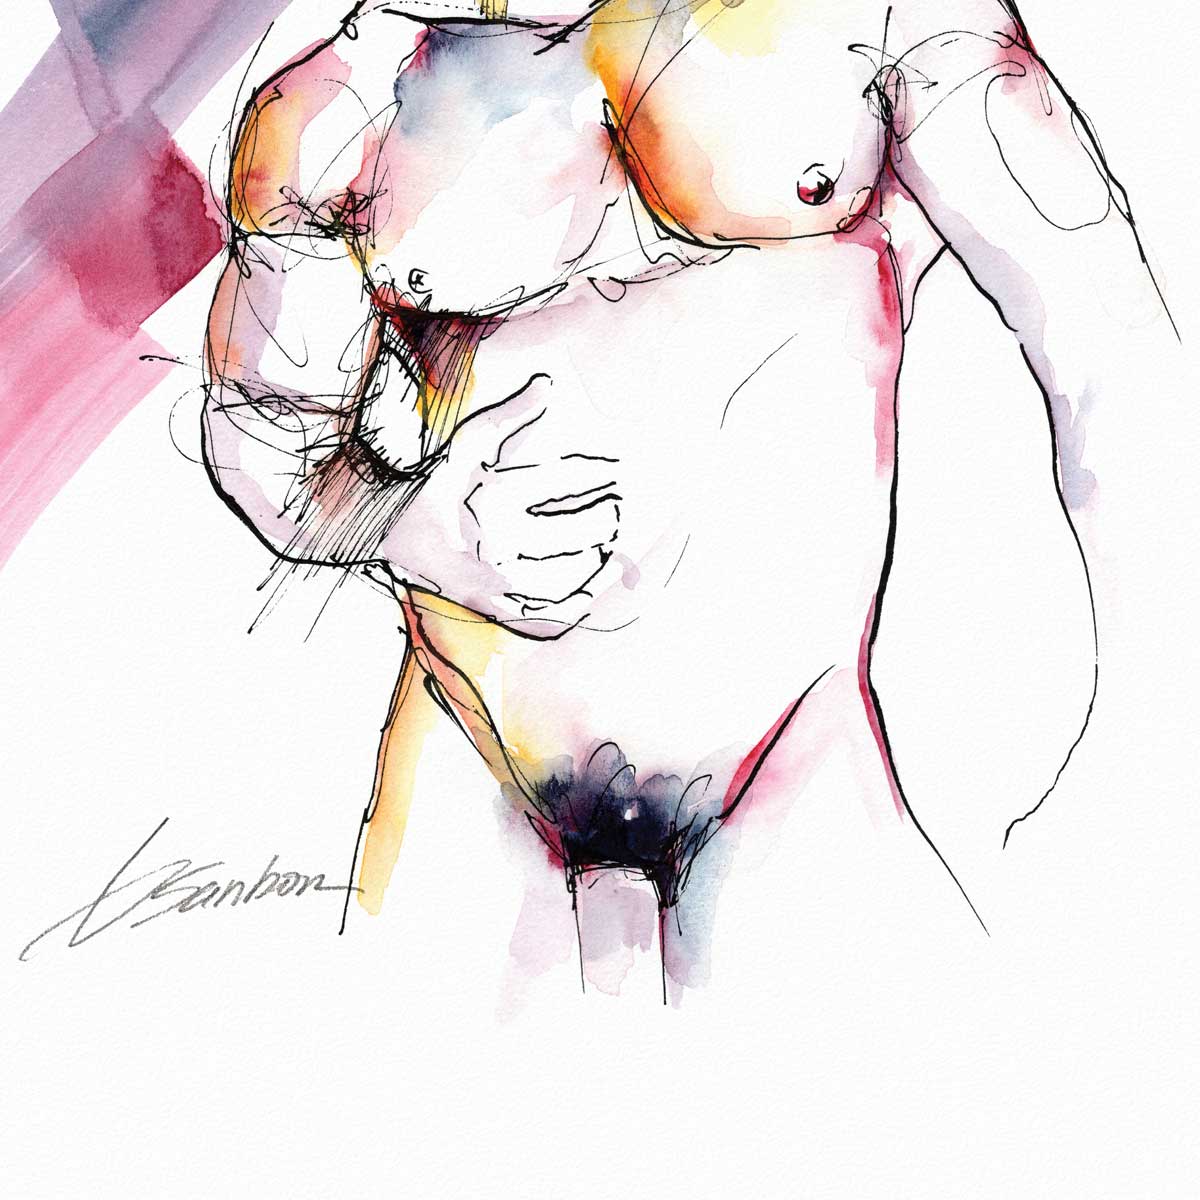 Male Torso Almost Full Nude Rubbing His Abs- Ink and Watercolor - Giclee Art Print